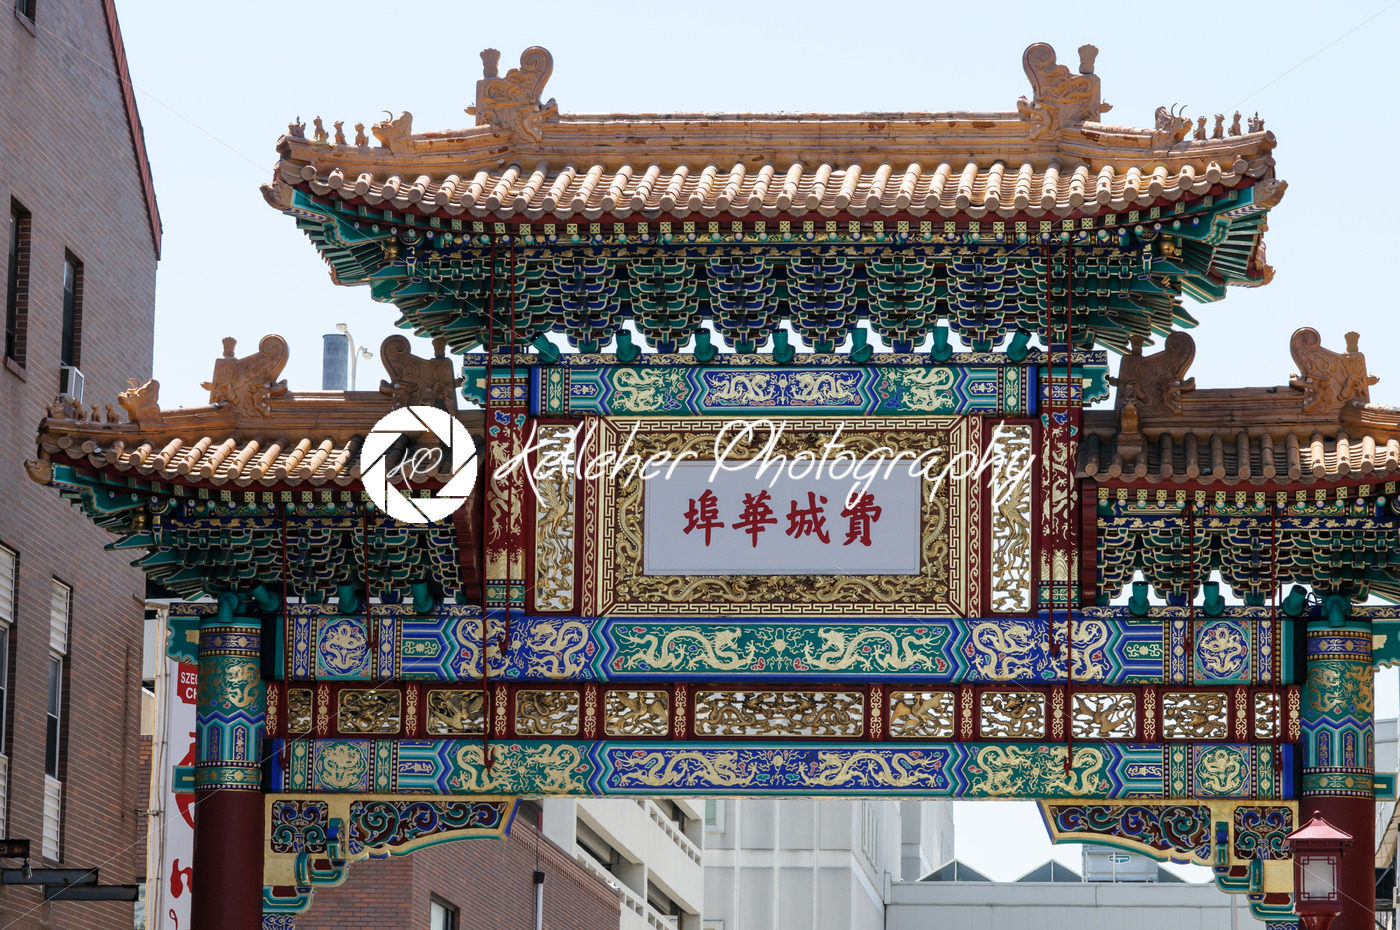 PHILADELPHIA, PA – MAY 14: The Arch in the Chinatown section of downtown Philadelphia on May 14, 2015 - Kelleher Photography Store